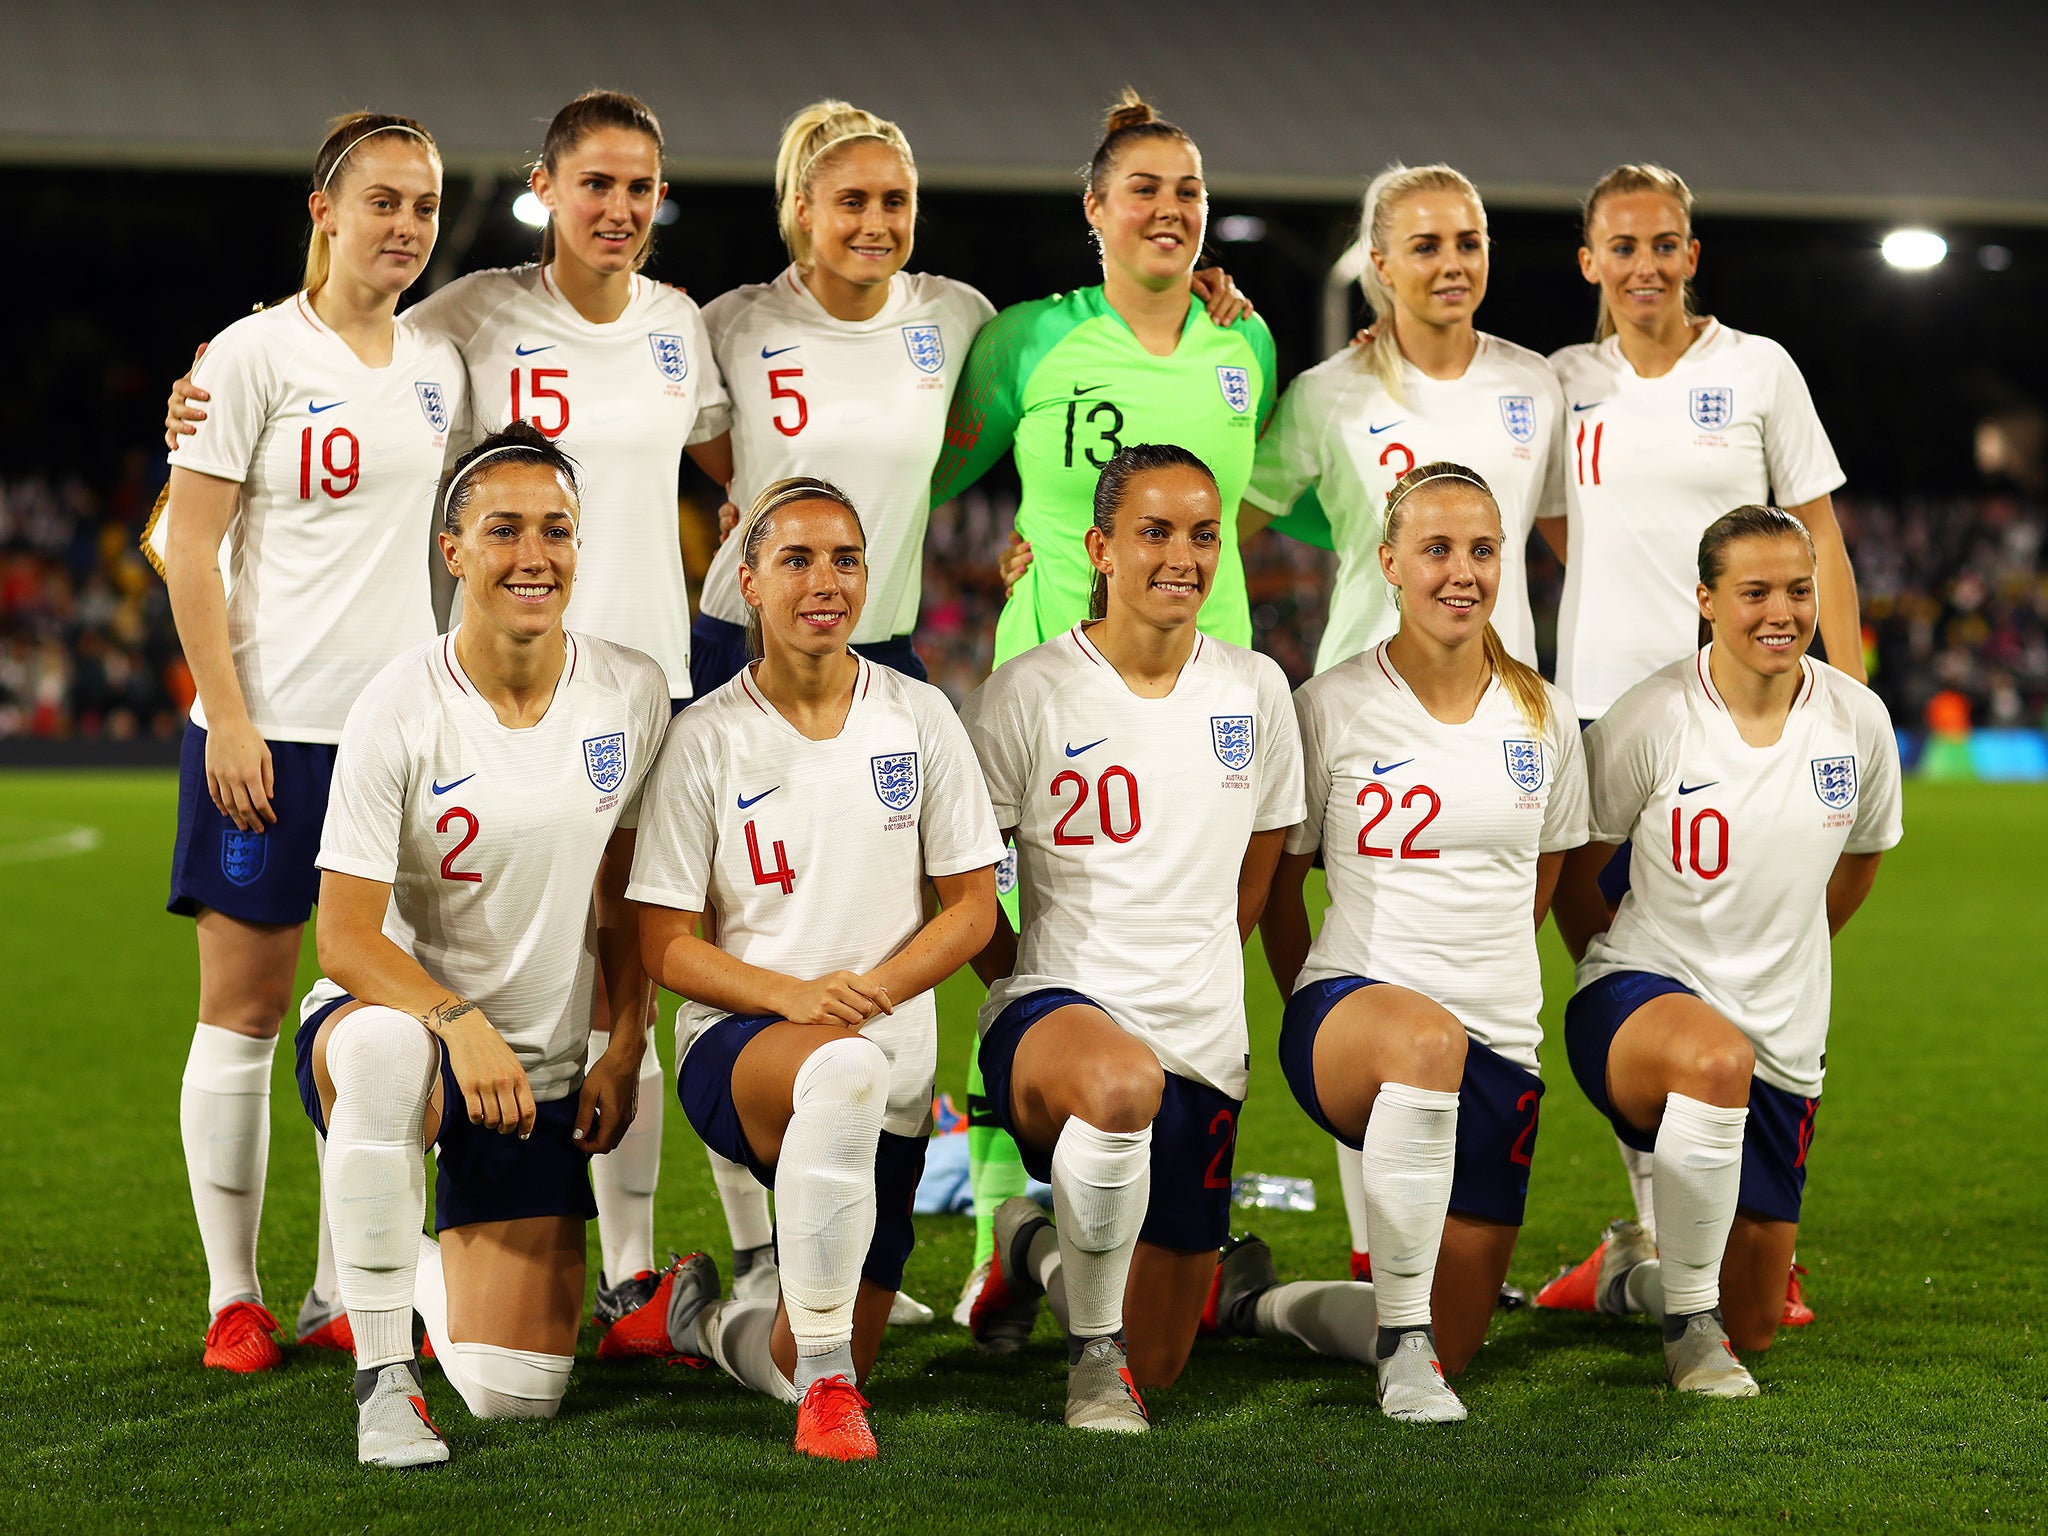 This will be England’s fifth appearance in the finals – they have reached at least the quarter-finals on each occasion